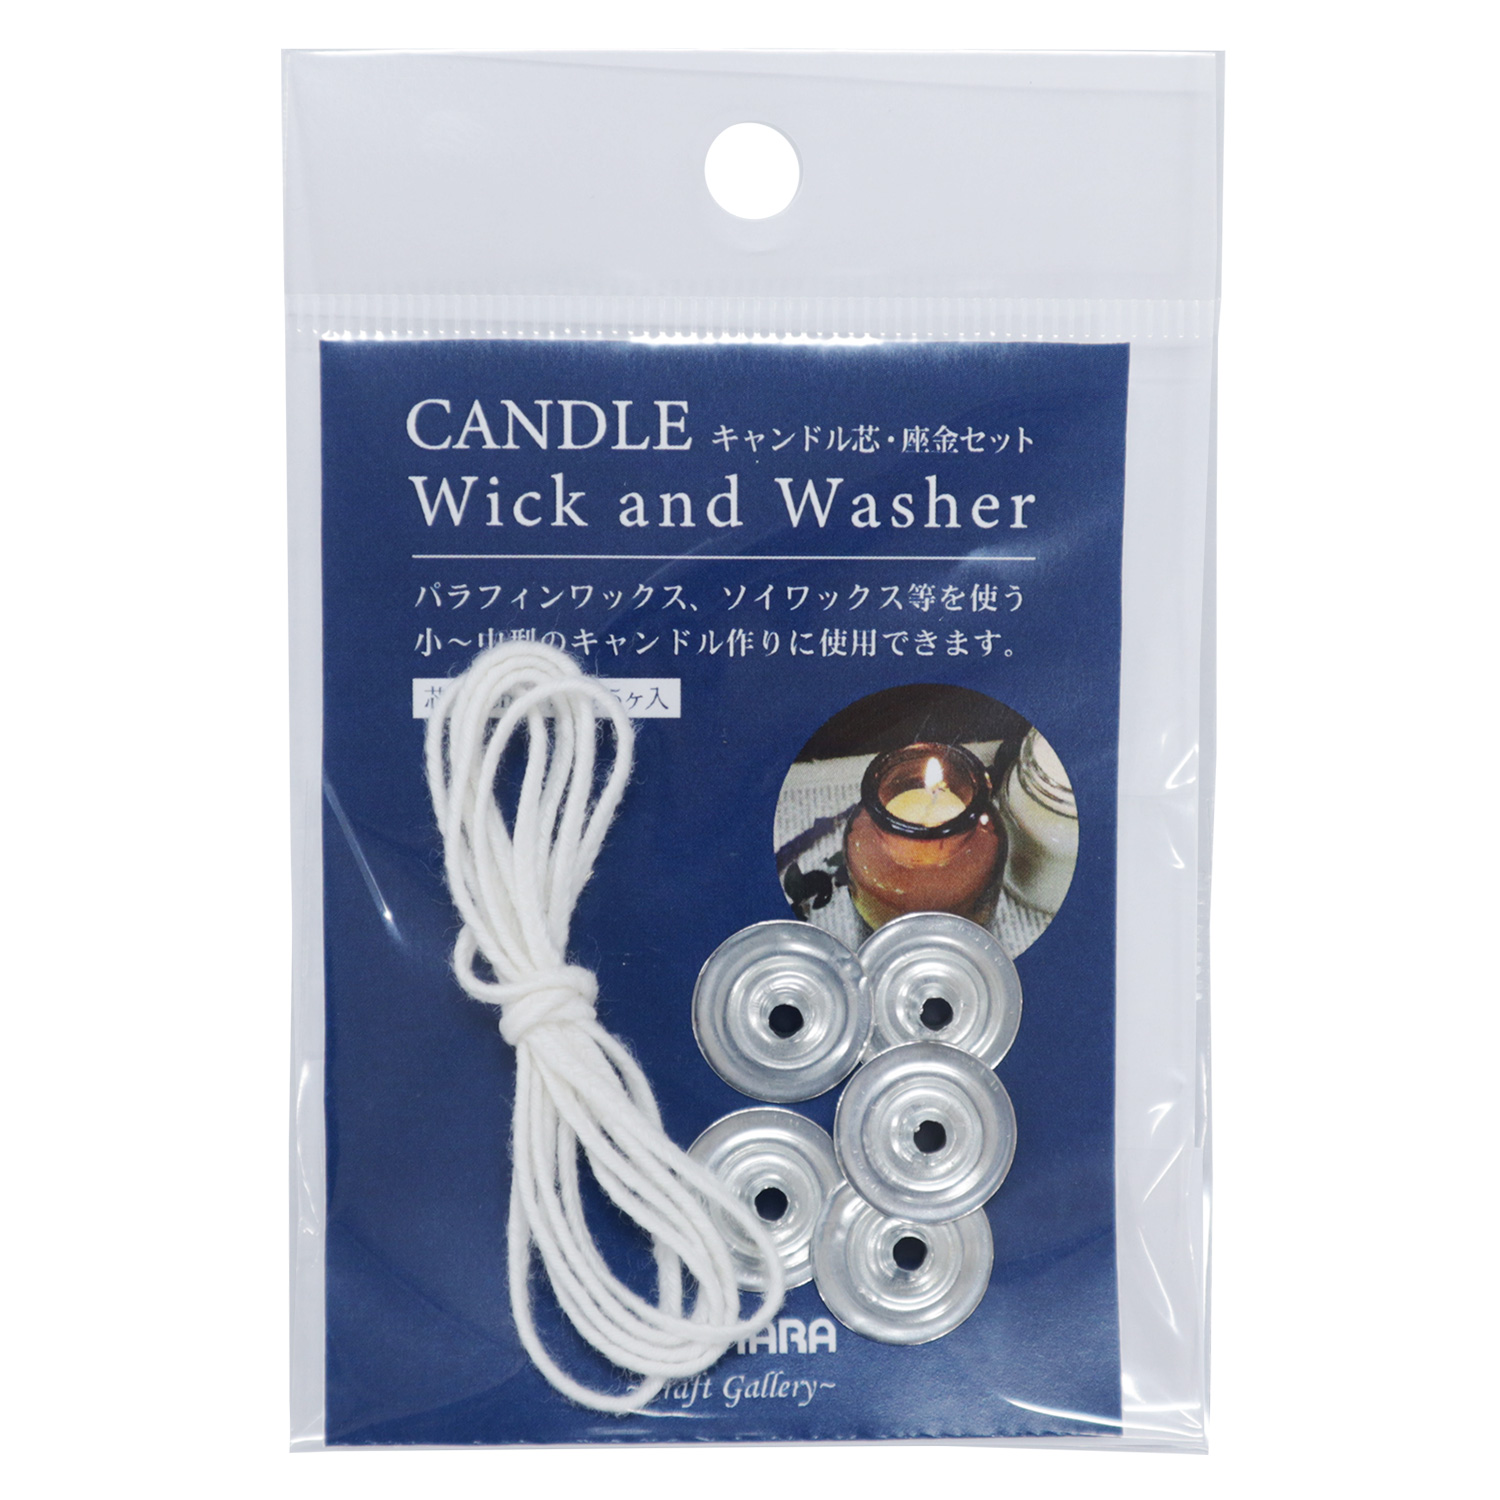 1-candle_wick_washer.jpg